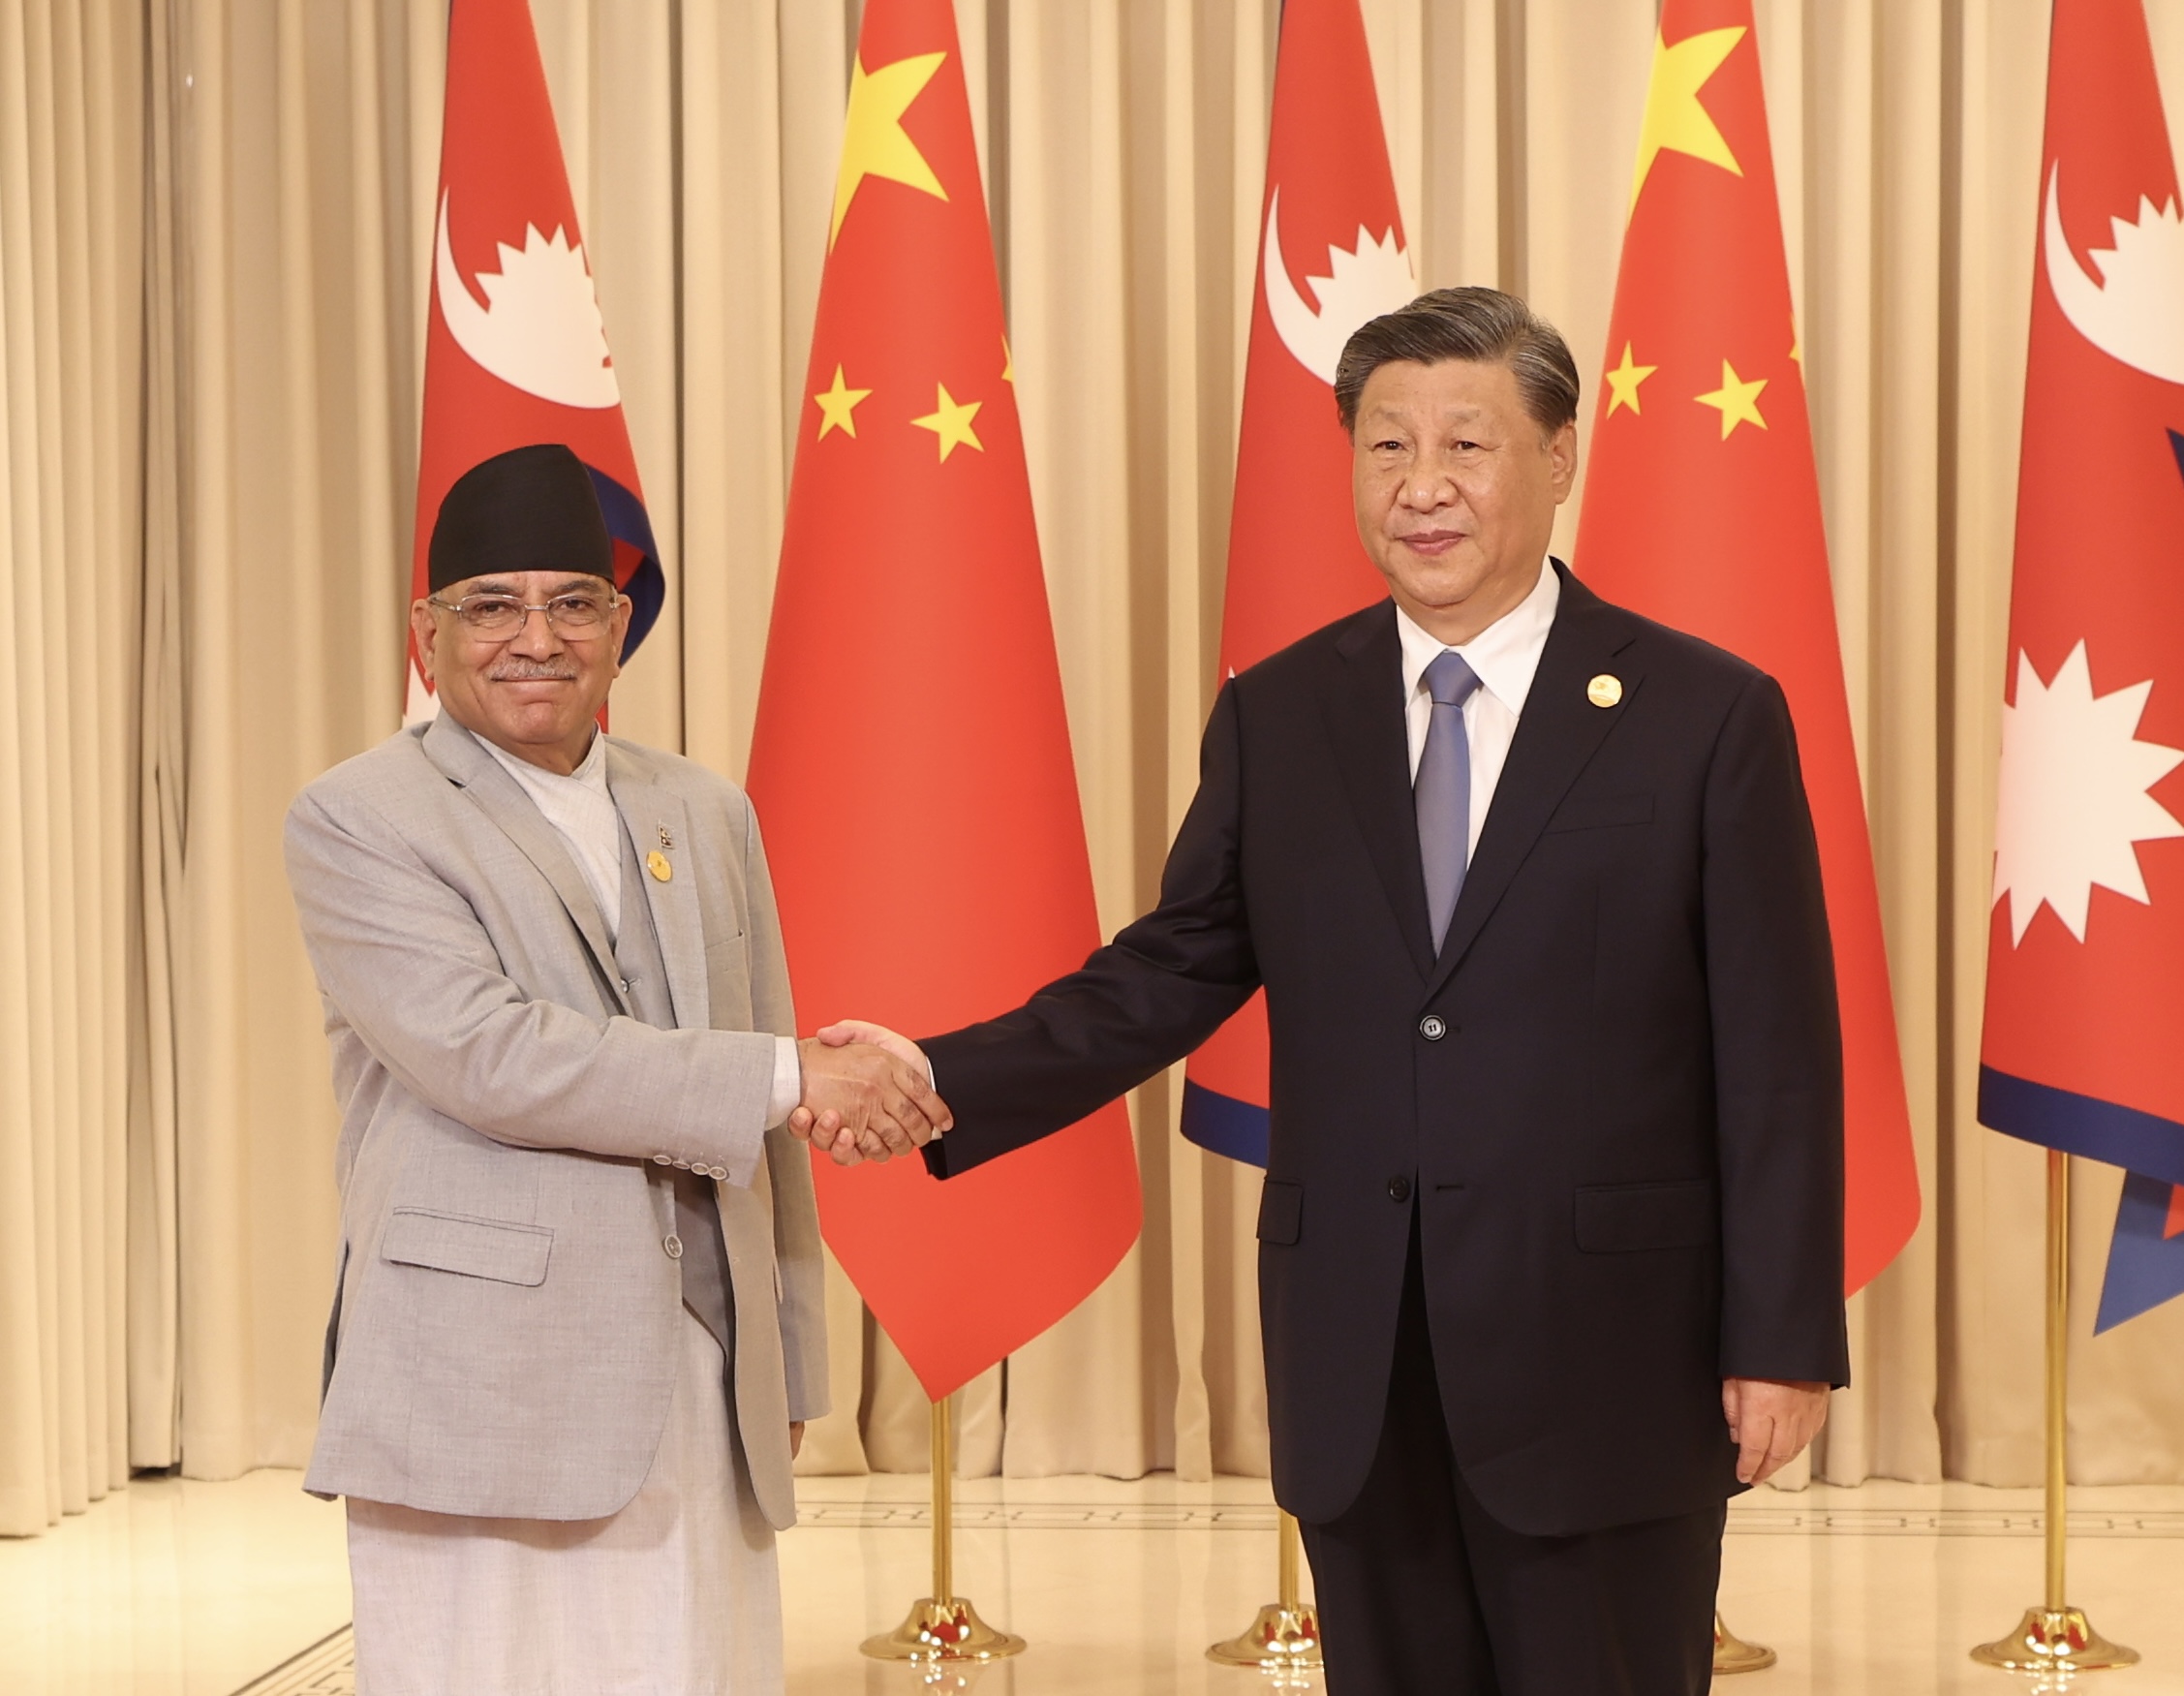  Prime Minister Dahal Holds Discussions with Chinese President Xt